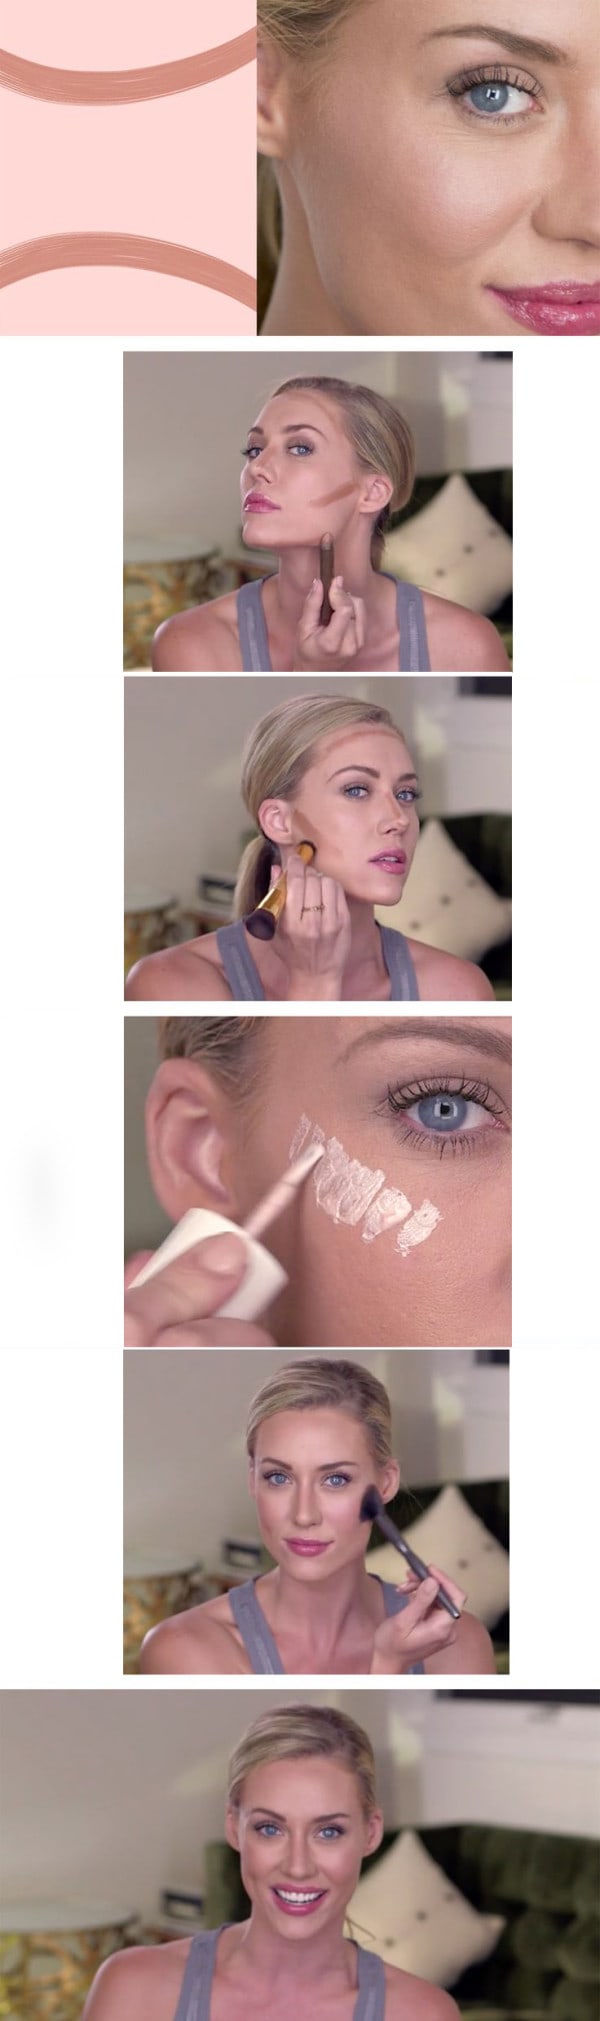 8 Simple But Ingenious Brilliant Beauty Tips And Hacks To Look Beautiful Anytime